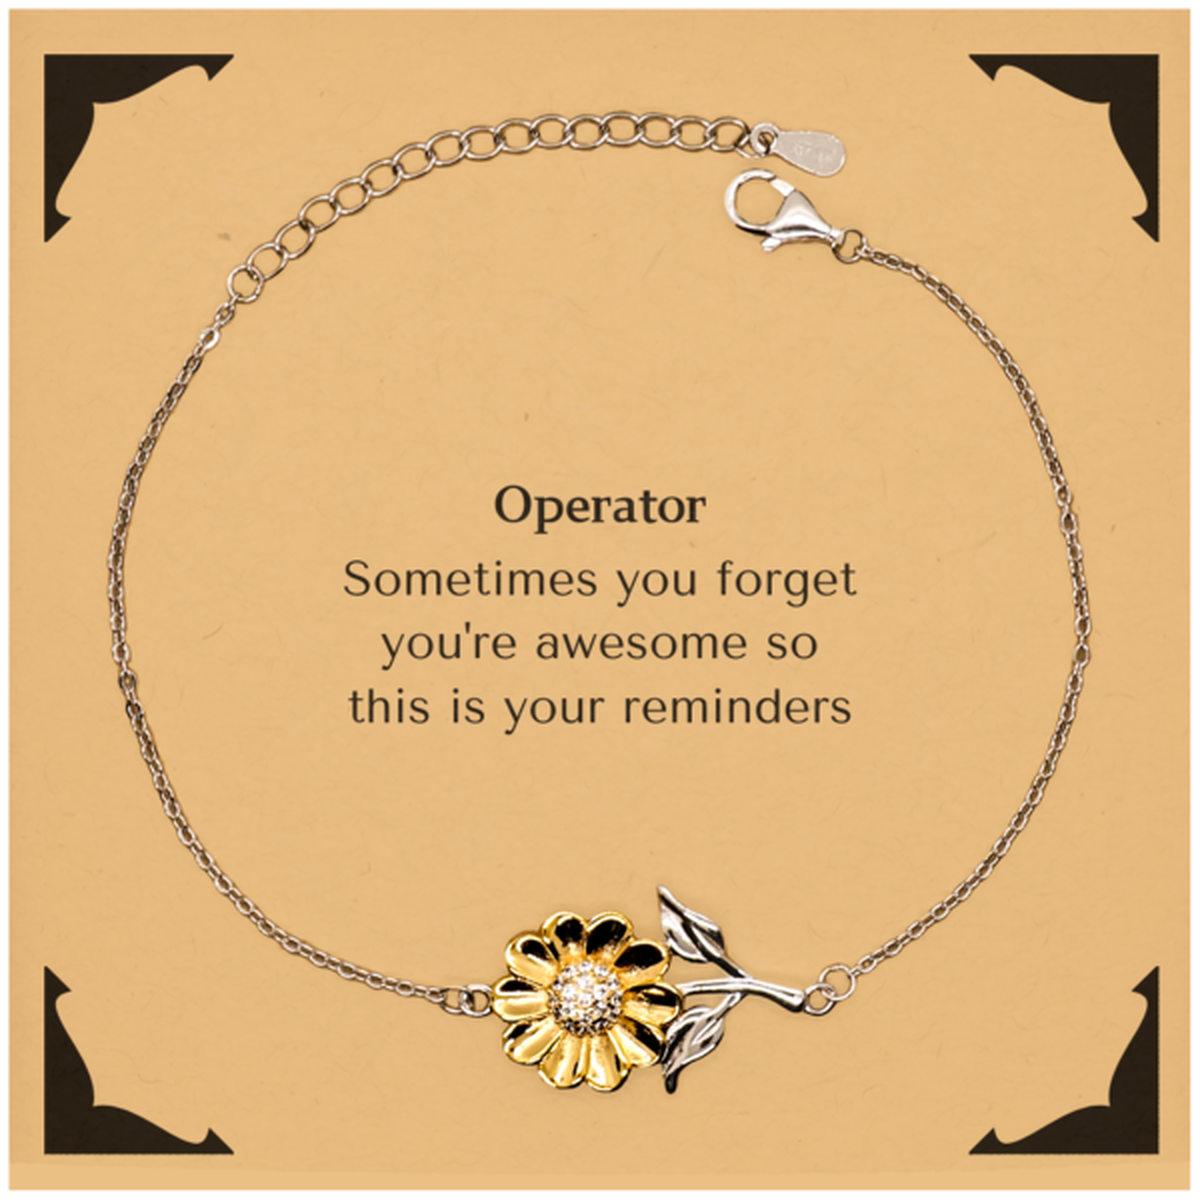 Sentimental Operator Sunflower Bracelet, Operator Sometimes you forget you're awesome so this is your reminders, Graduation Christmas Birthday Gifts for Operator, Men, Women, Coworkers